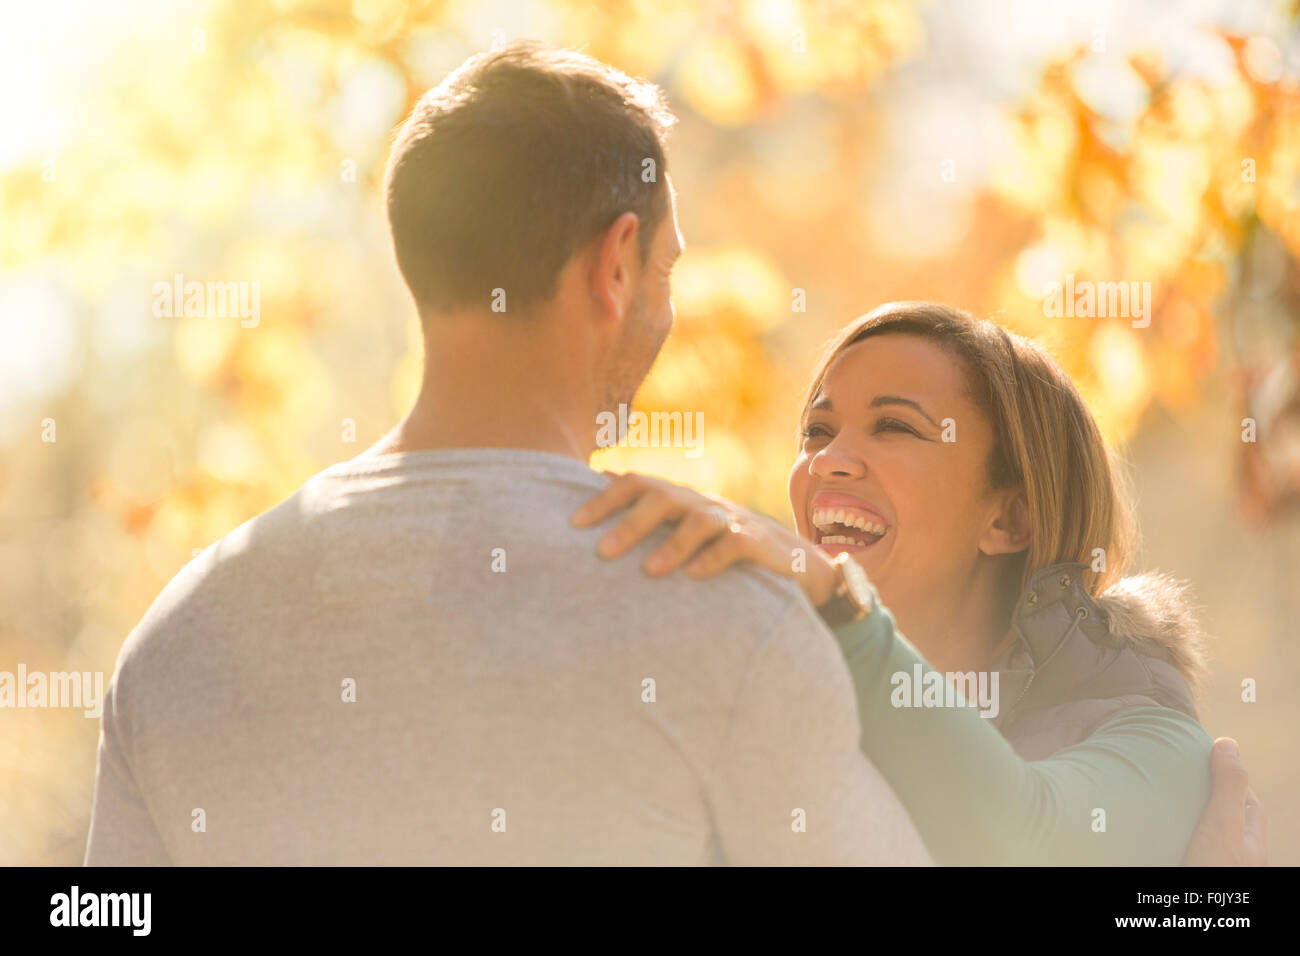 Laughing couple face to face outdoors Stock Photo